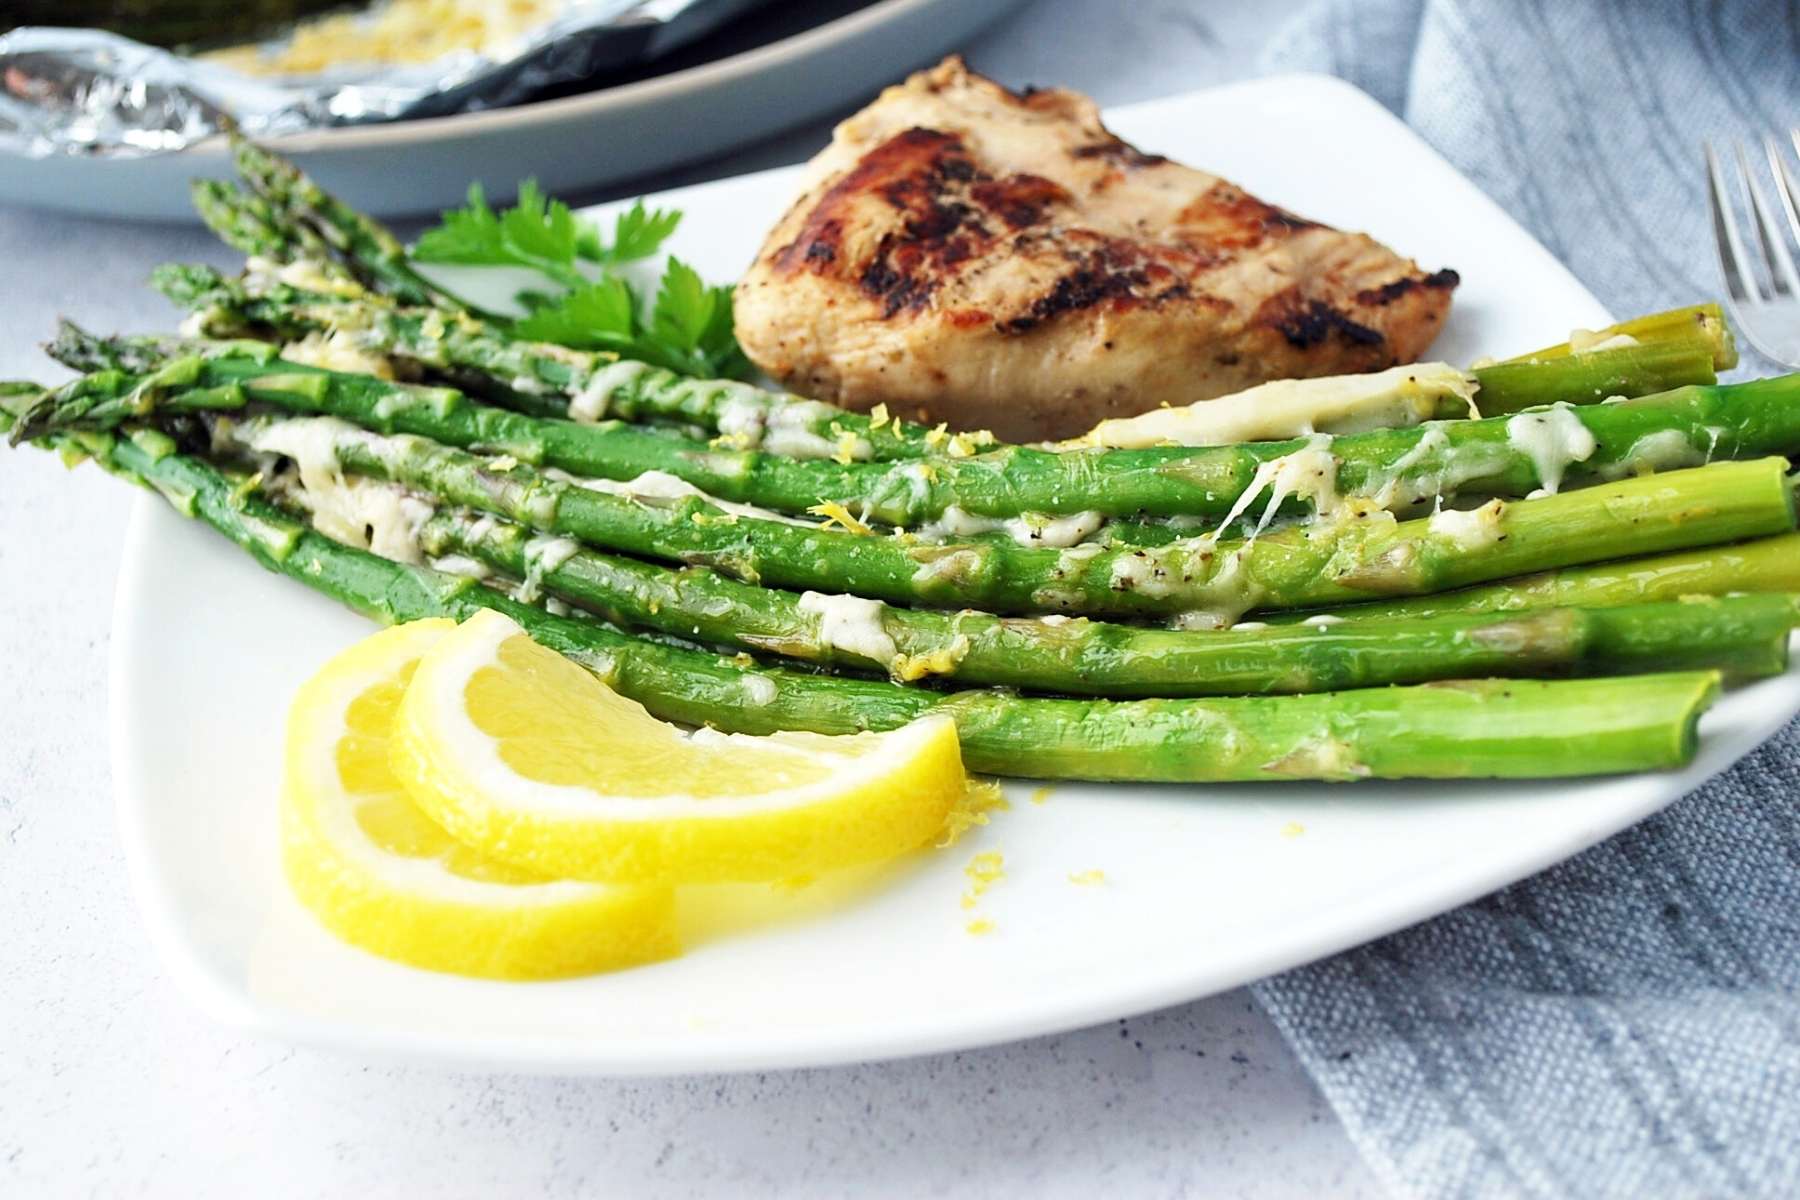 Grilled asparagus on a plate with lemon slices and grilled chicken